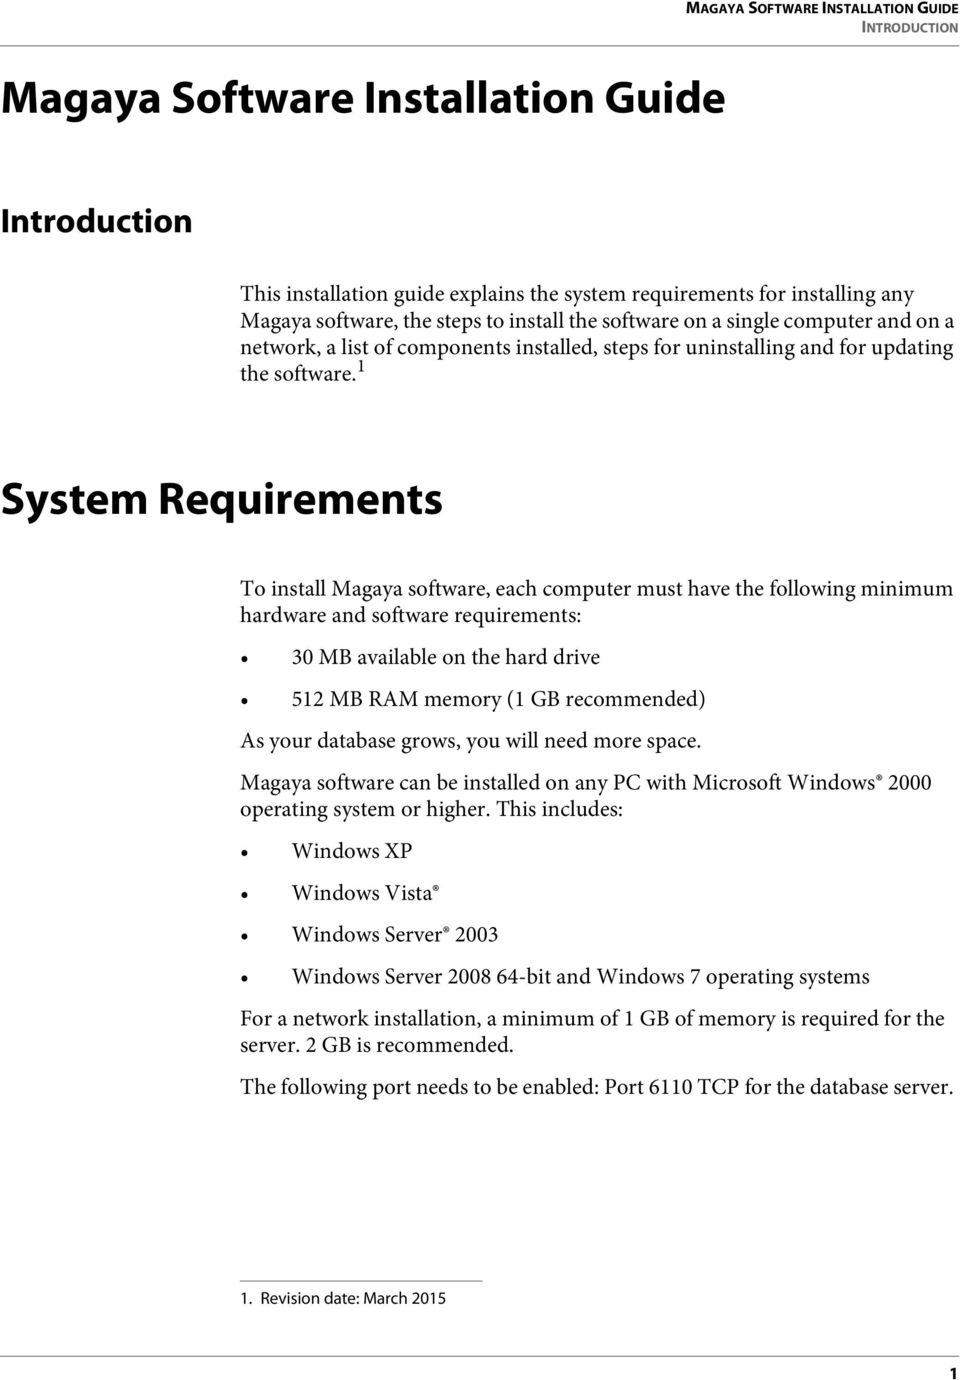 1 System Requirements To install Magaya software, each computer must have the following minimum hardware and software requirements: 30 MB available on the hard drive 512 MB RAM memory (1 GB